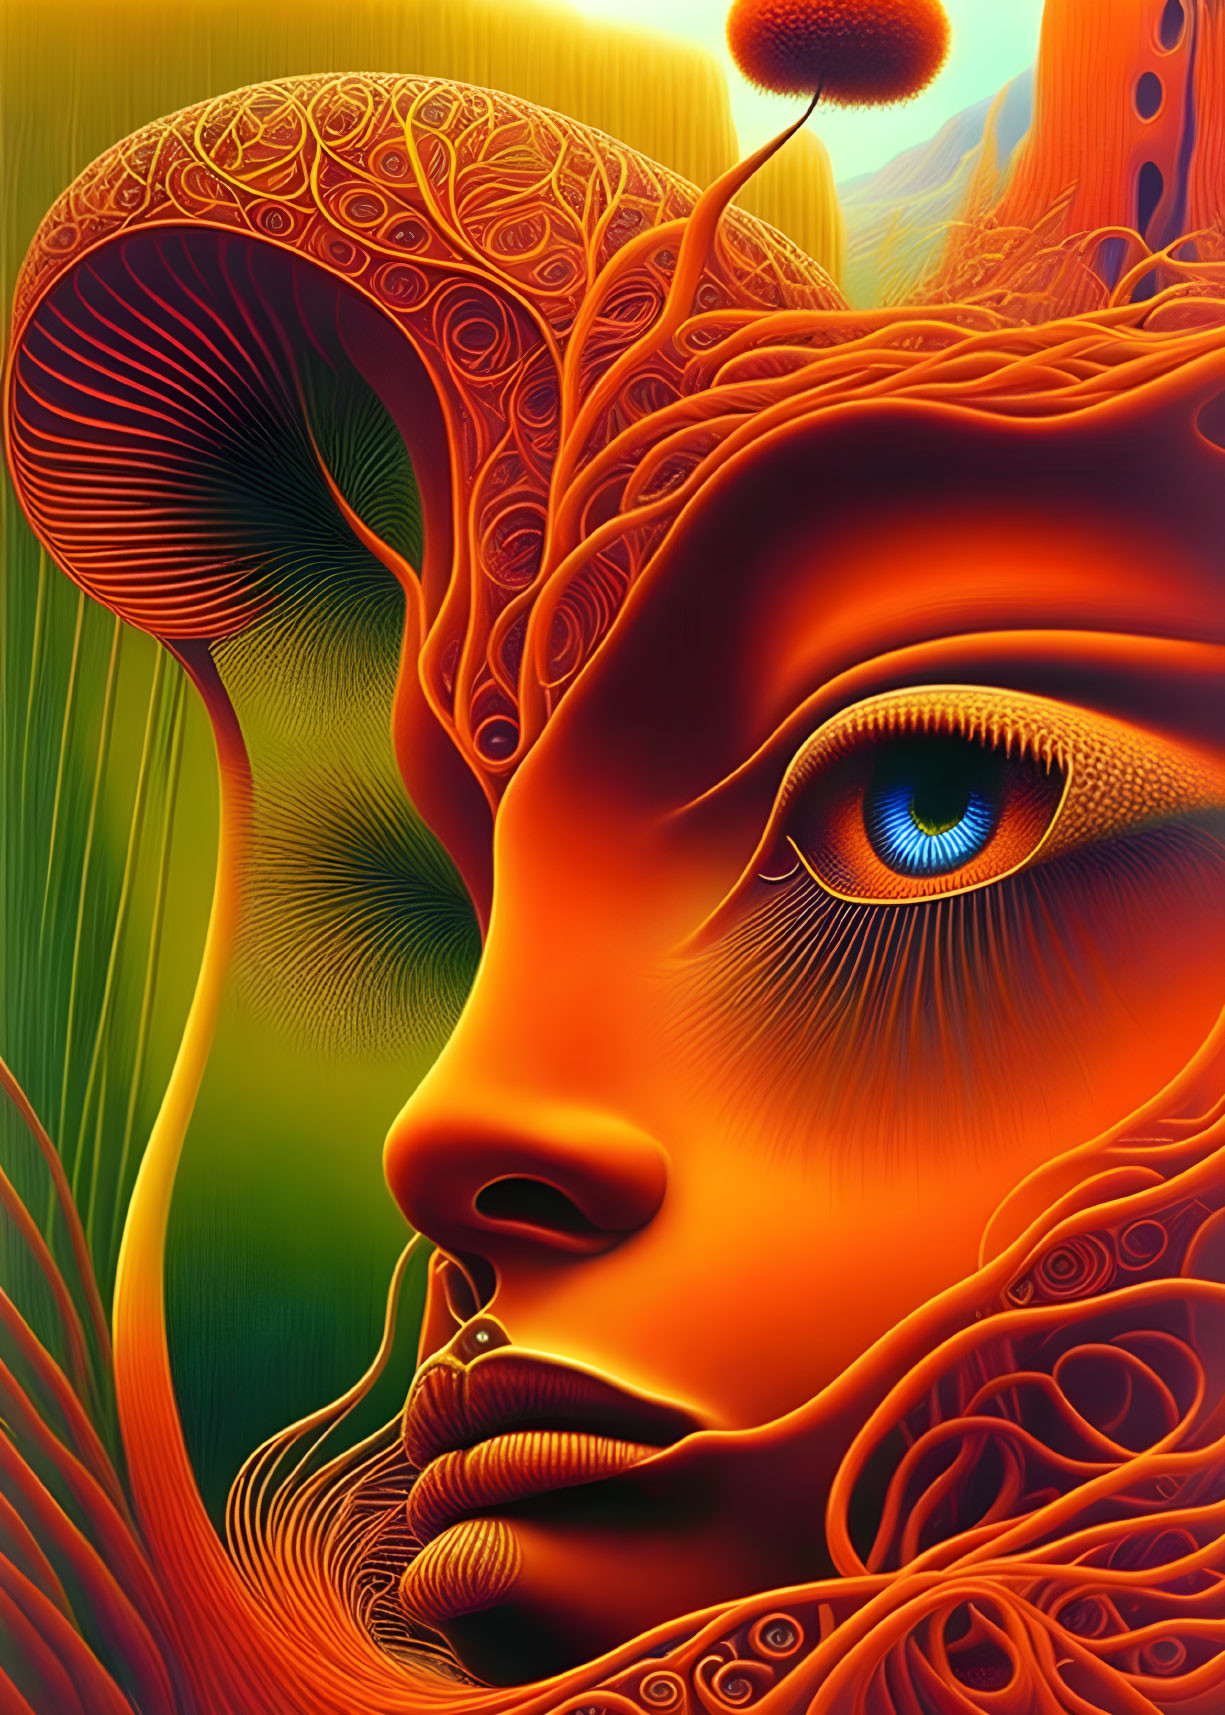 Colorful digital artwork of stylized female face with intricate designs and glowing orange hues.